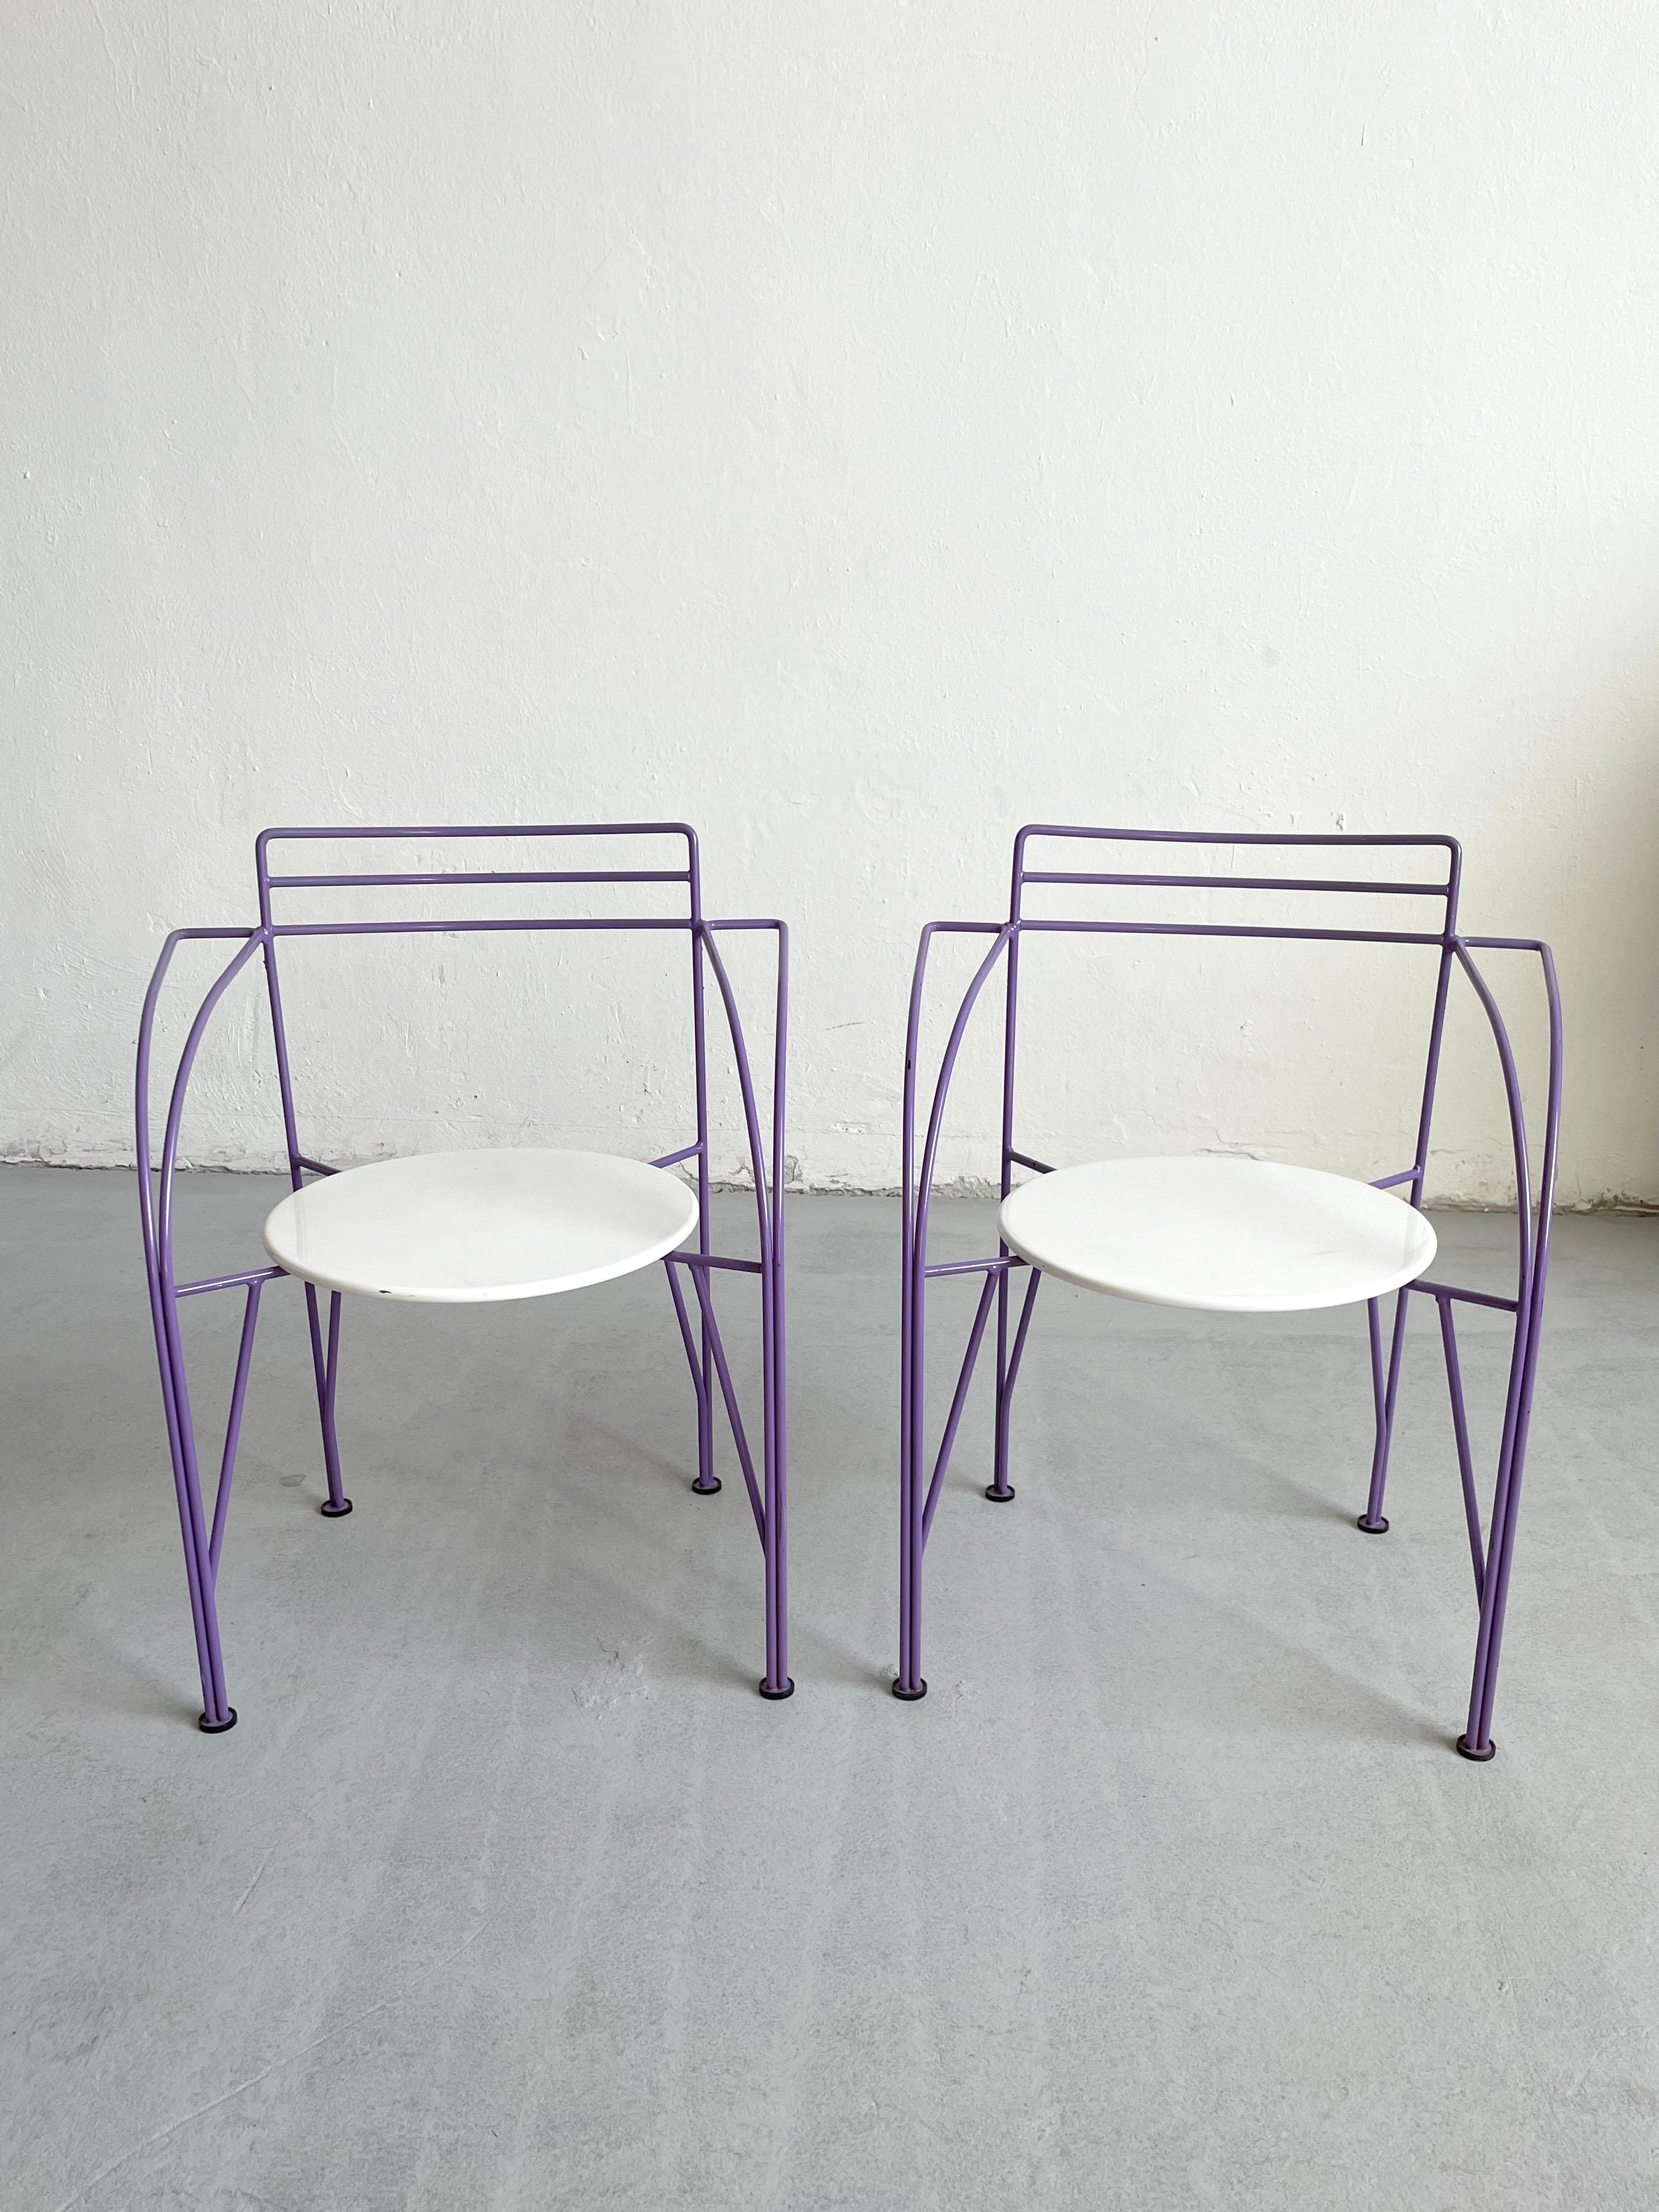 Set of 2 Postmodern Minimalist French Chairs 'Lune D'argent' by Pascal Mourgue 1